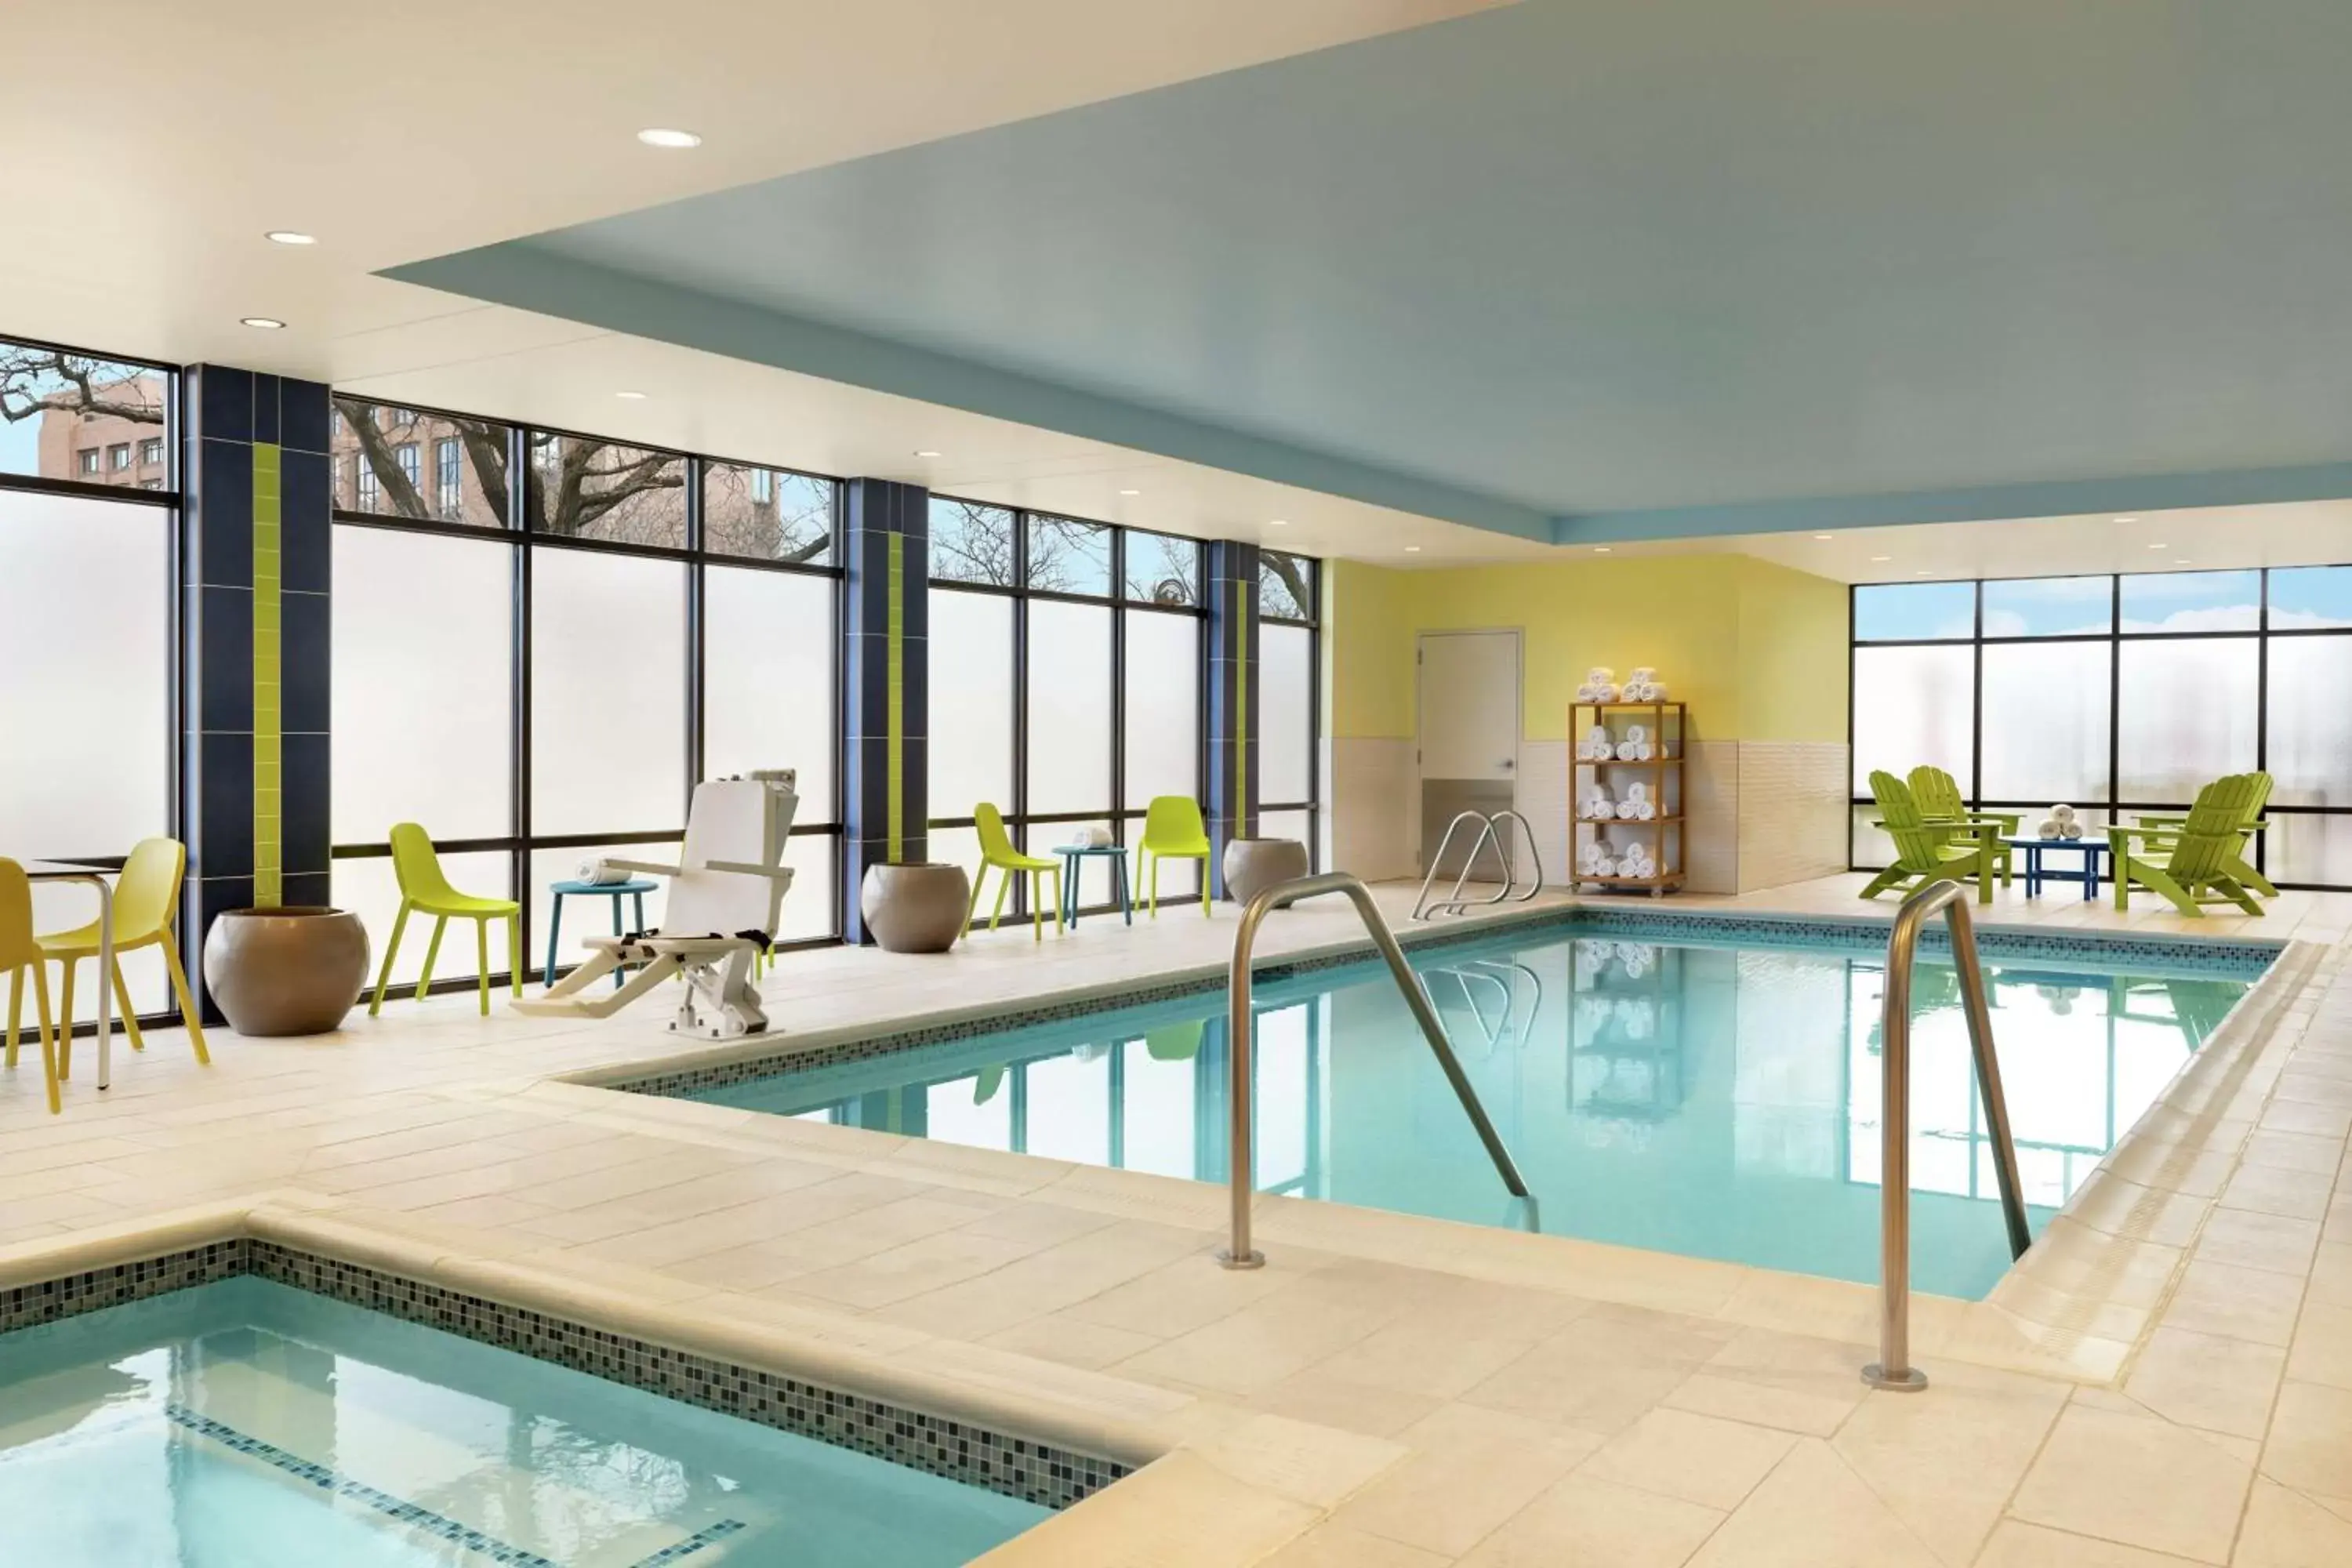 Swimming Pool in Home2 Suites By Hilton Ogden